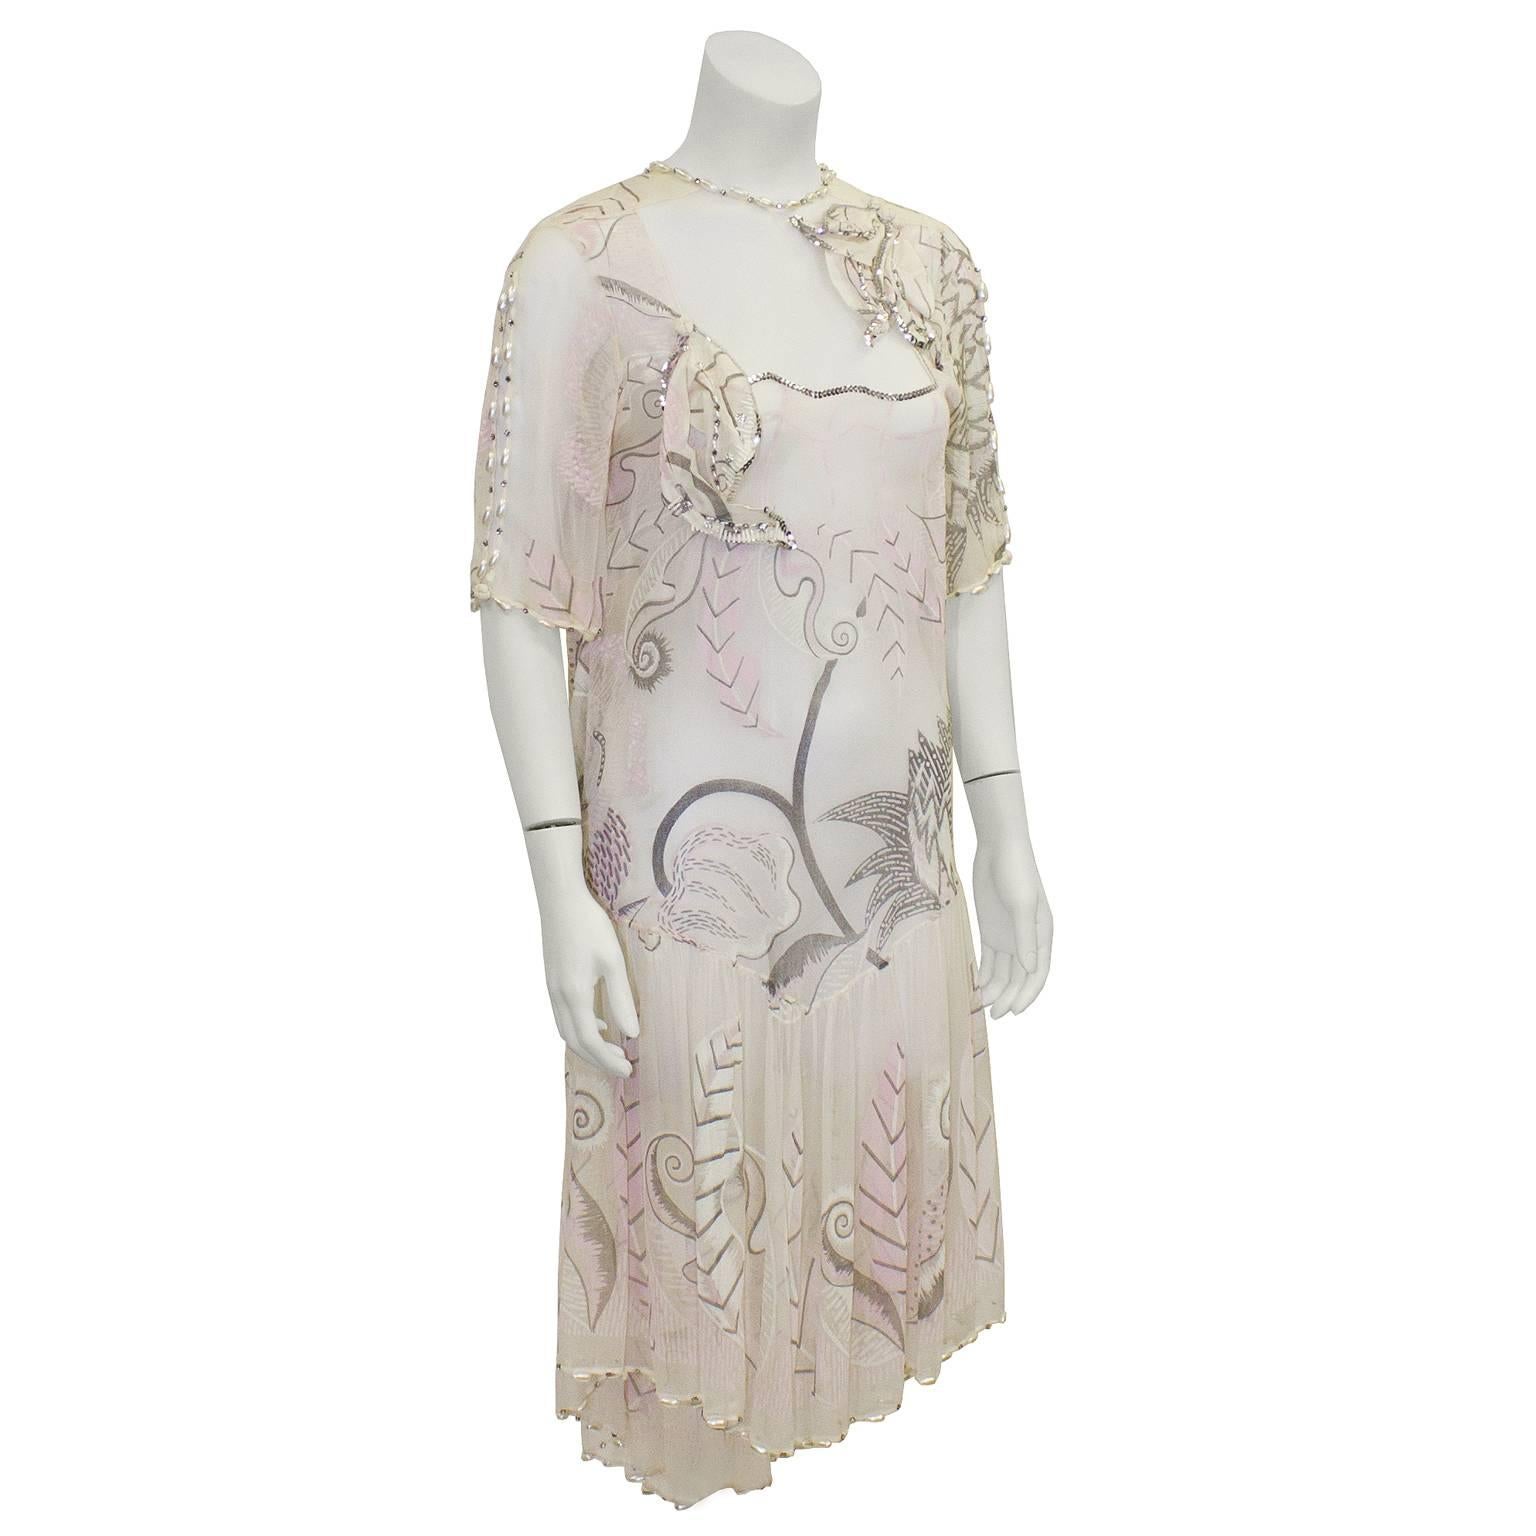 Stunning 1980's Zandra Rhodes light pink and cream hand painted silk chiffon dress. Sheer fabric on the decolletage with short sleeves. Pearl detailing along the neckline, sleeves and hem. Drop waist, with a very low cowl back. Renowned free hand